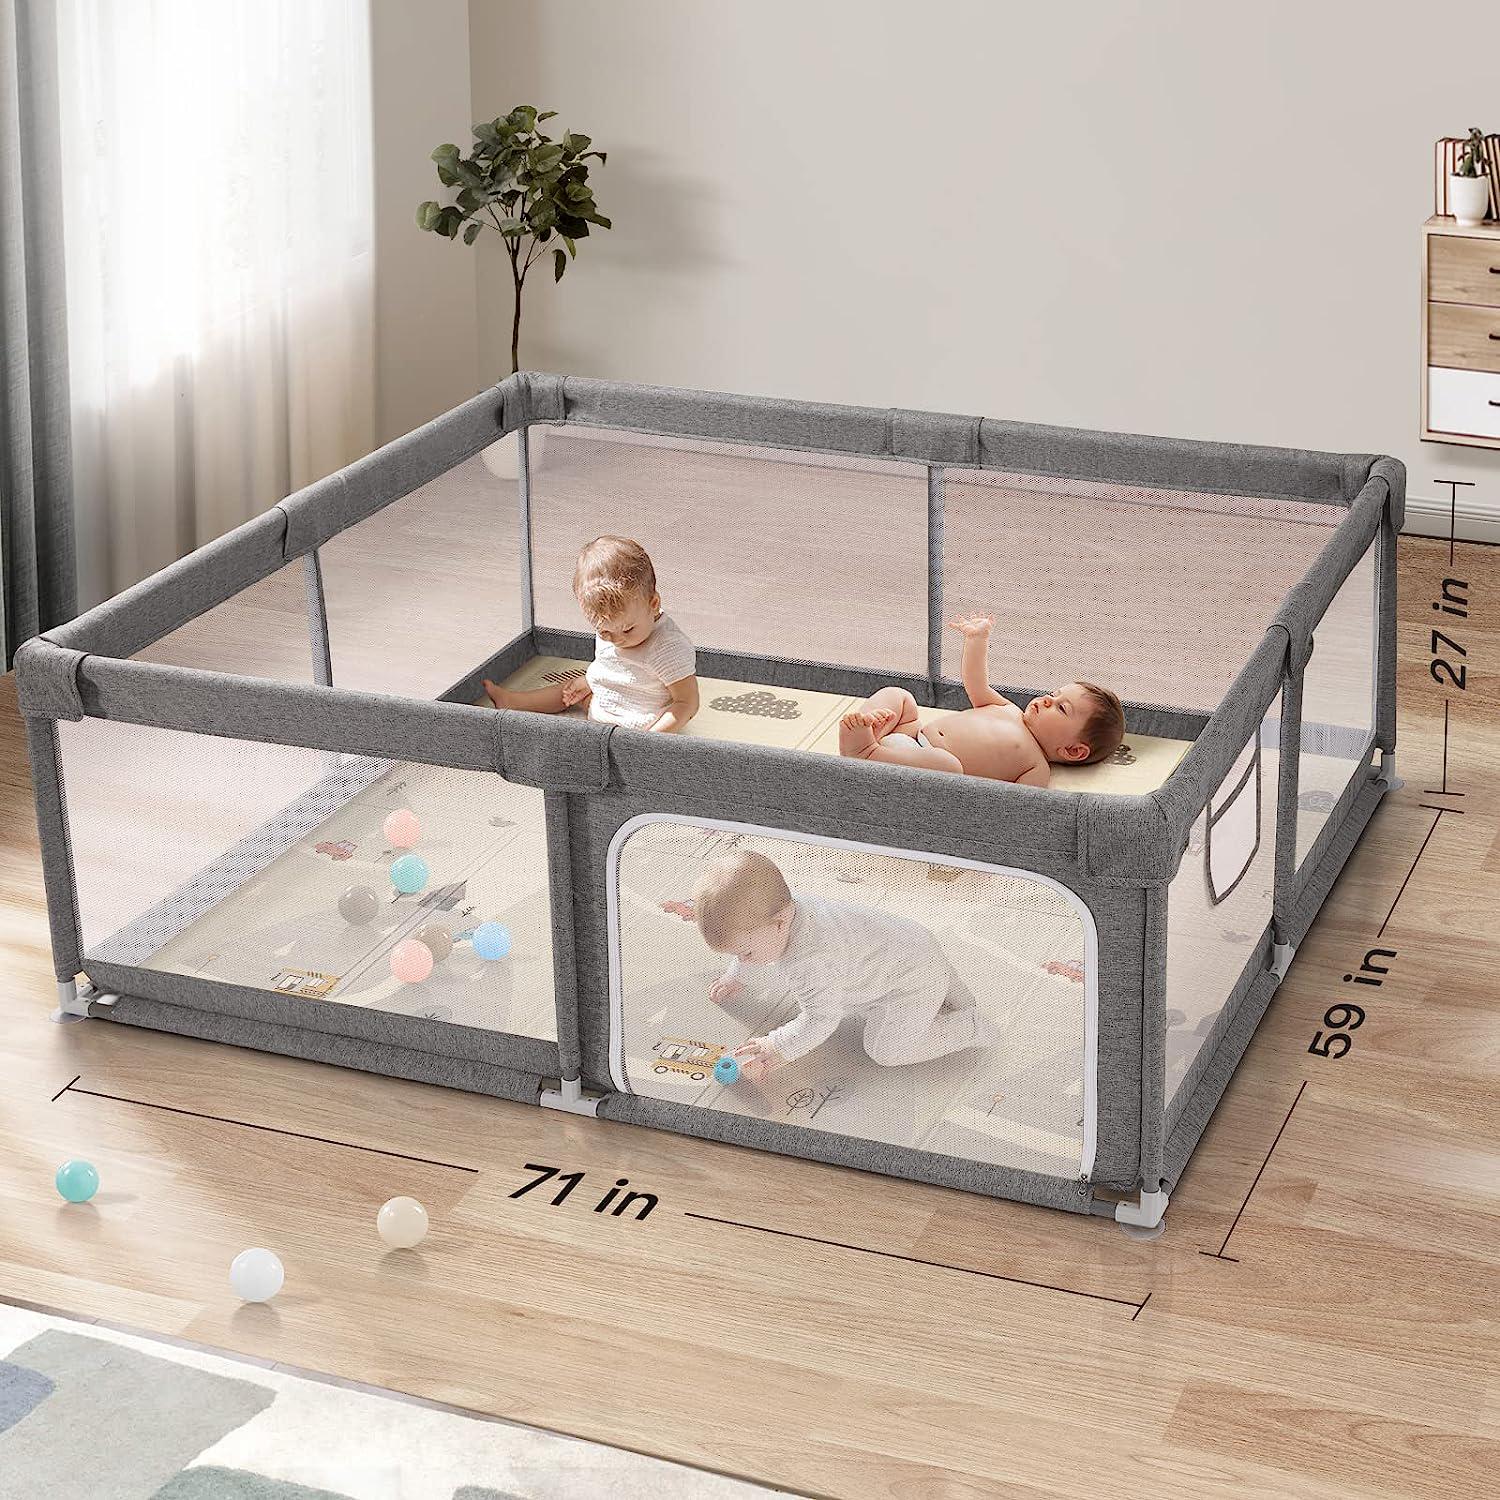 Baby playpen with mat Play pens for Babies and Toddlers Foldable Baby gate playpen Baby gate playpen playard for Baby-